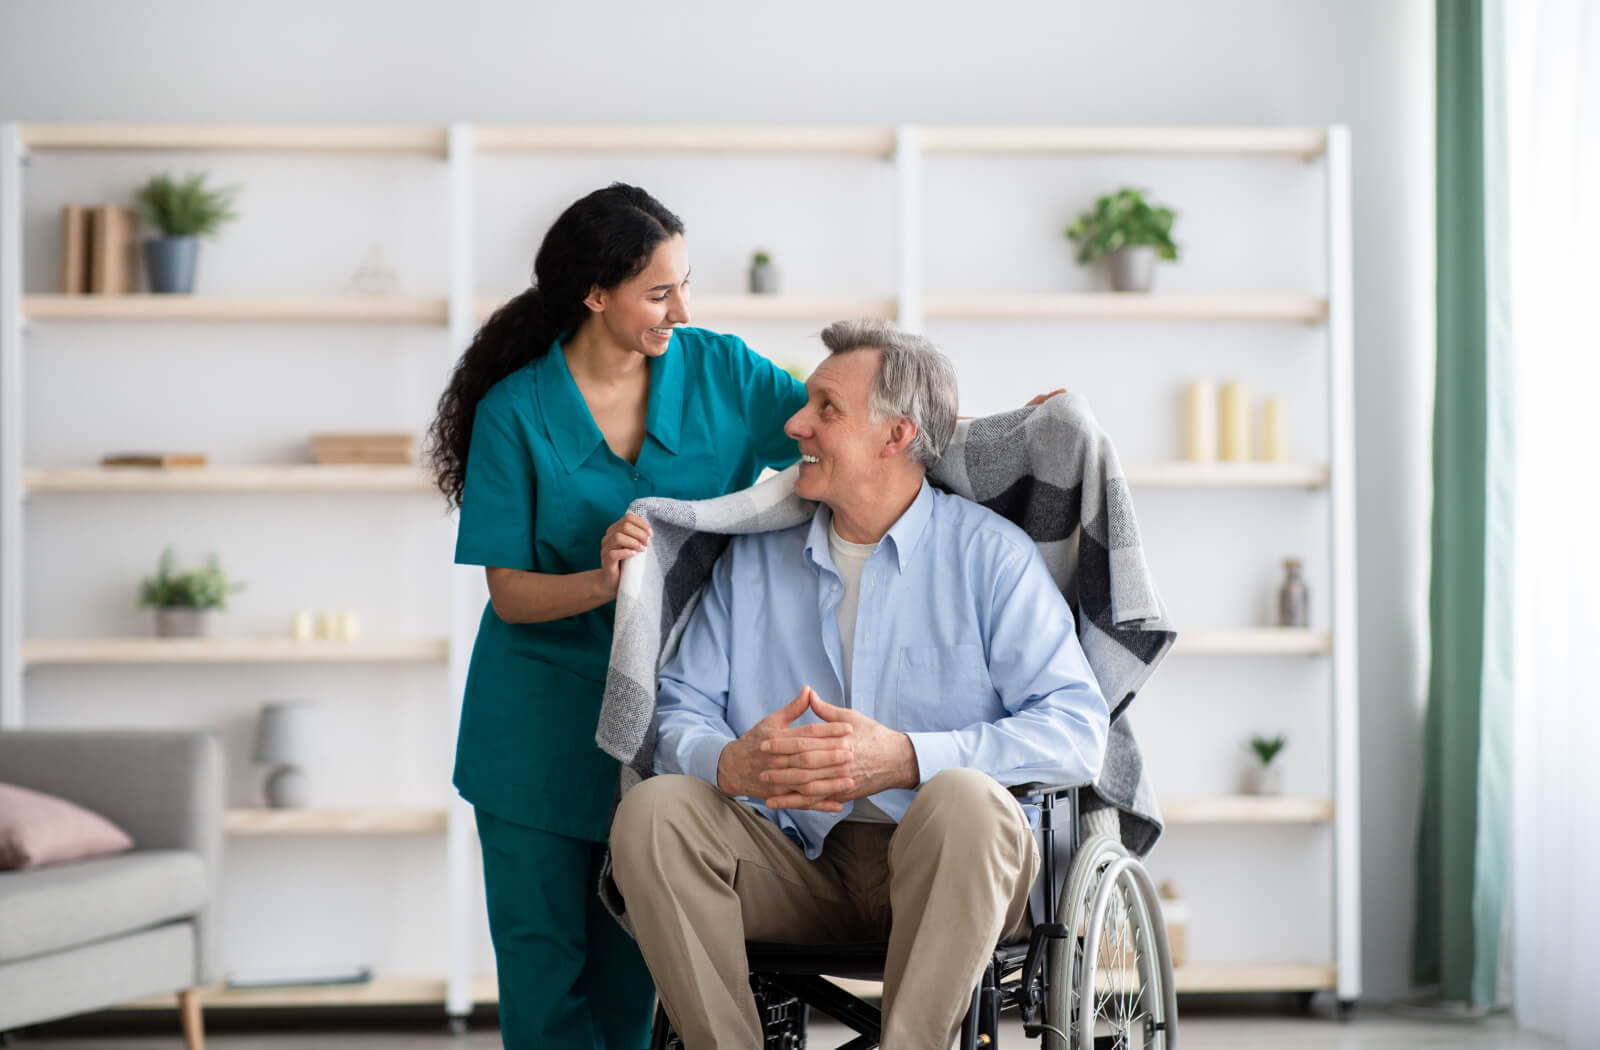 A female nurse helping a senior man in a wheelchair and covering him with a blanket.